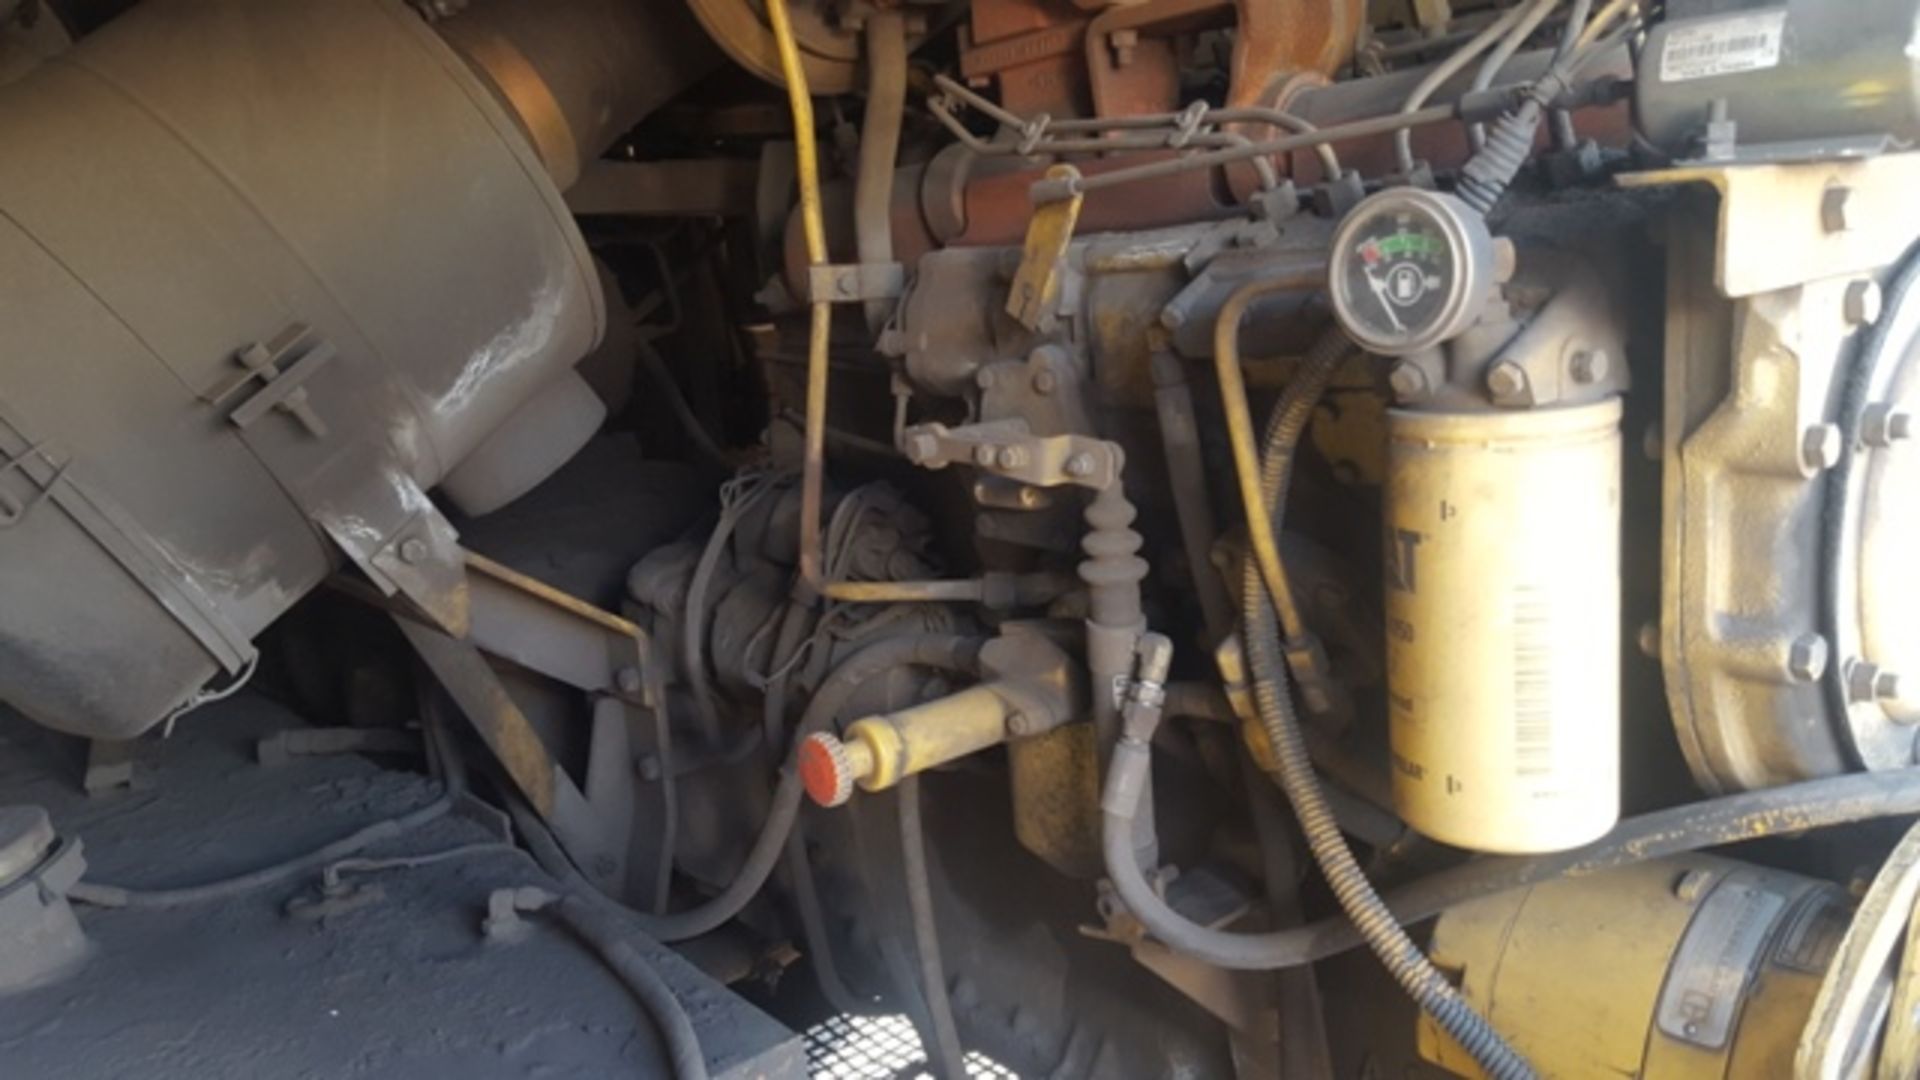 GENSET COMPRESSOR WITH CAT ENGINE HOURS:24896 ( SERIAL:XD 900SCA) LOCATED IN HOTAZEL, NC) - Image 5 of 9